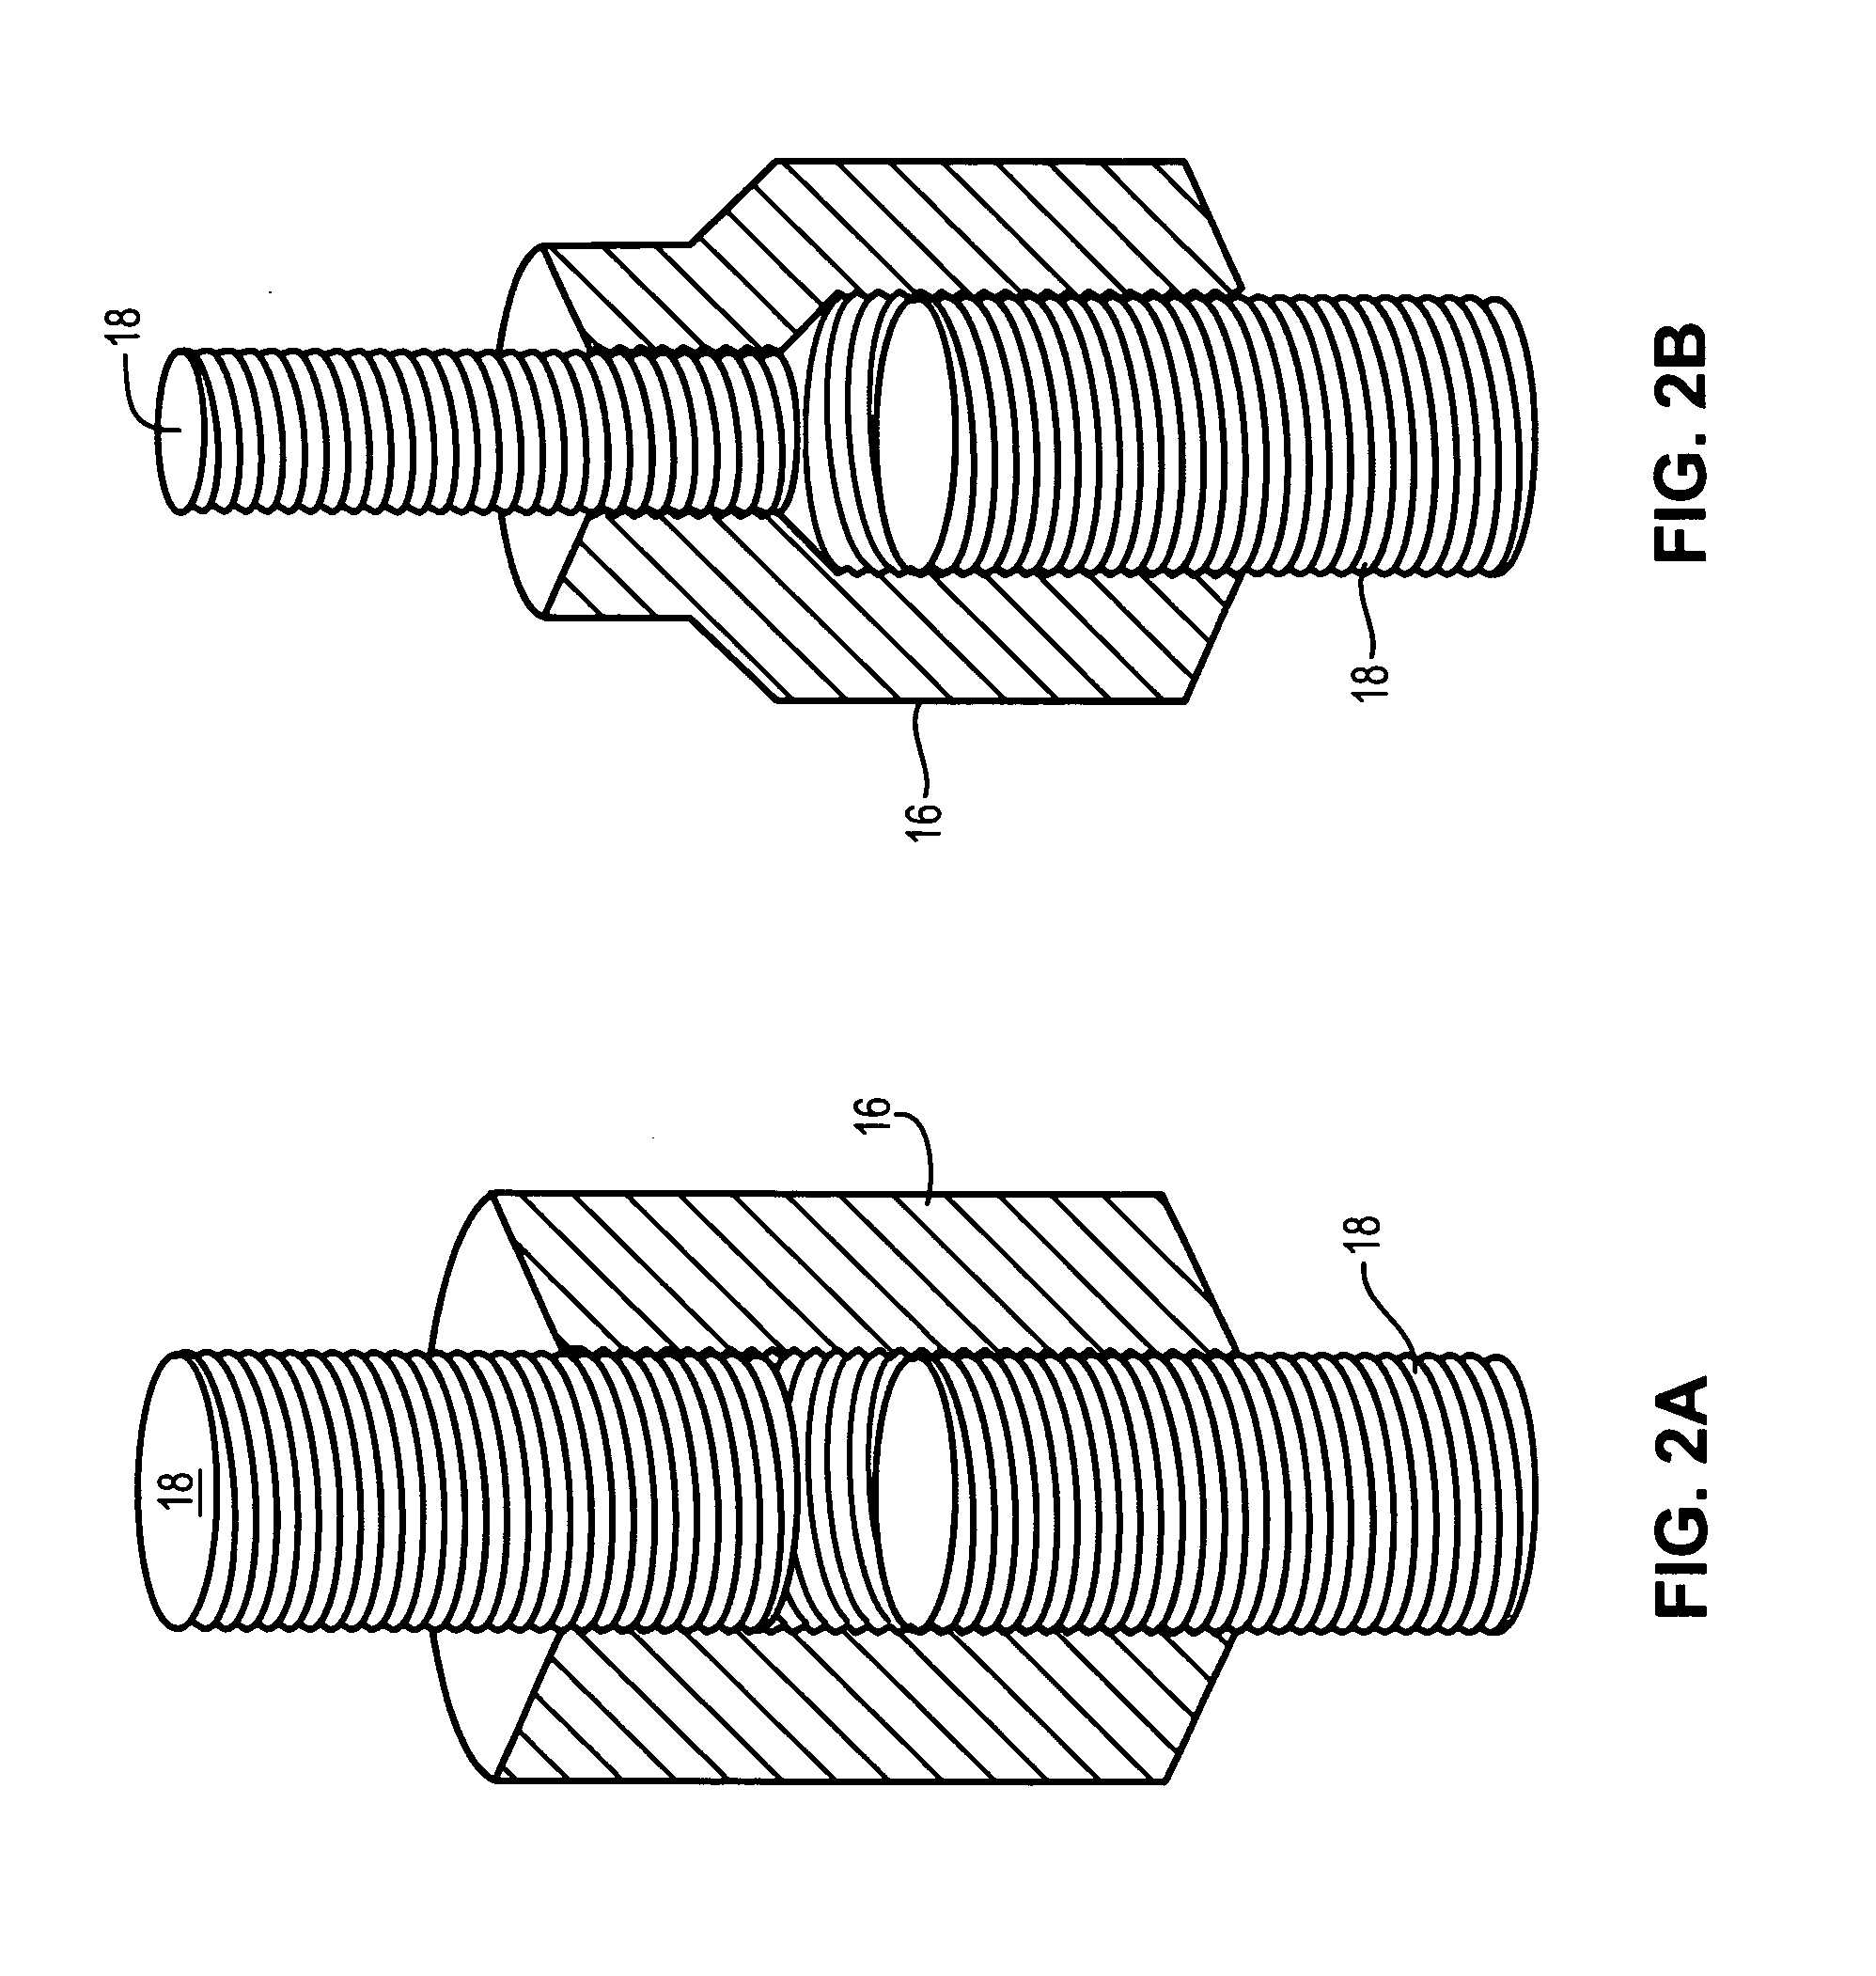 Continuously threaded hold-down system